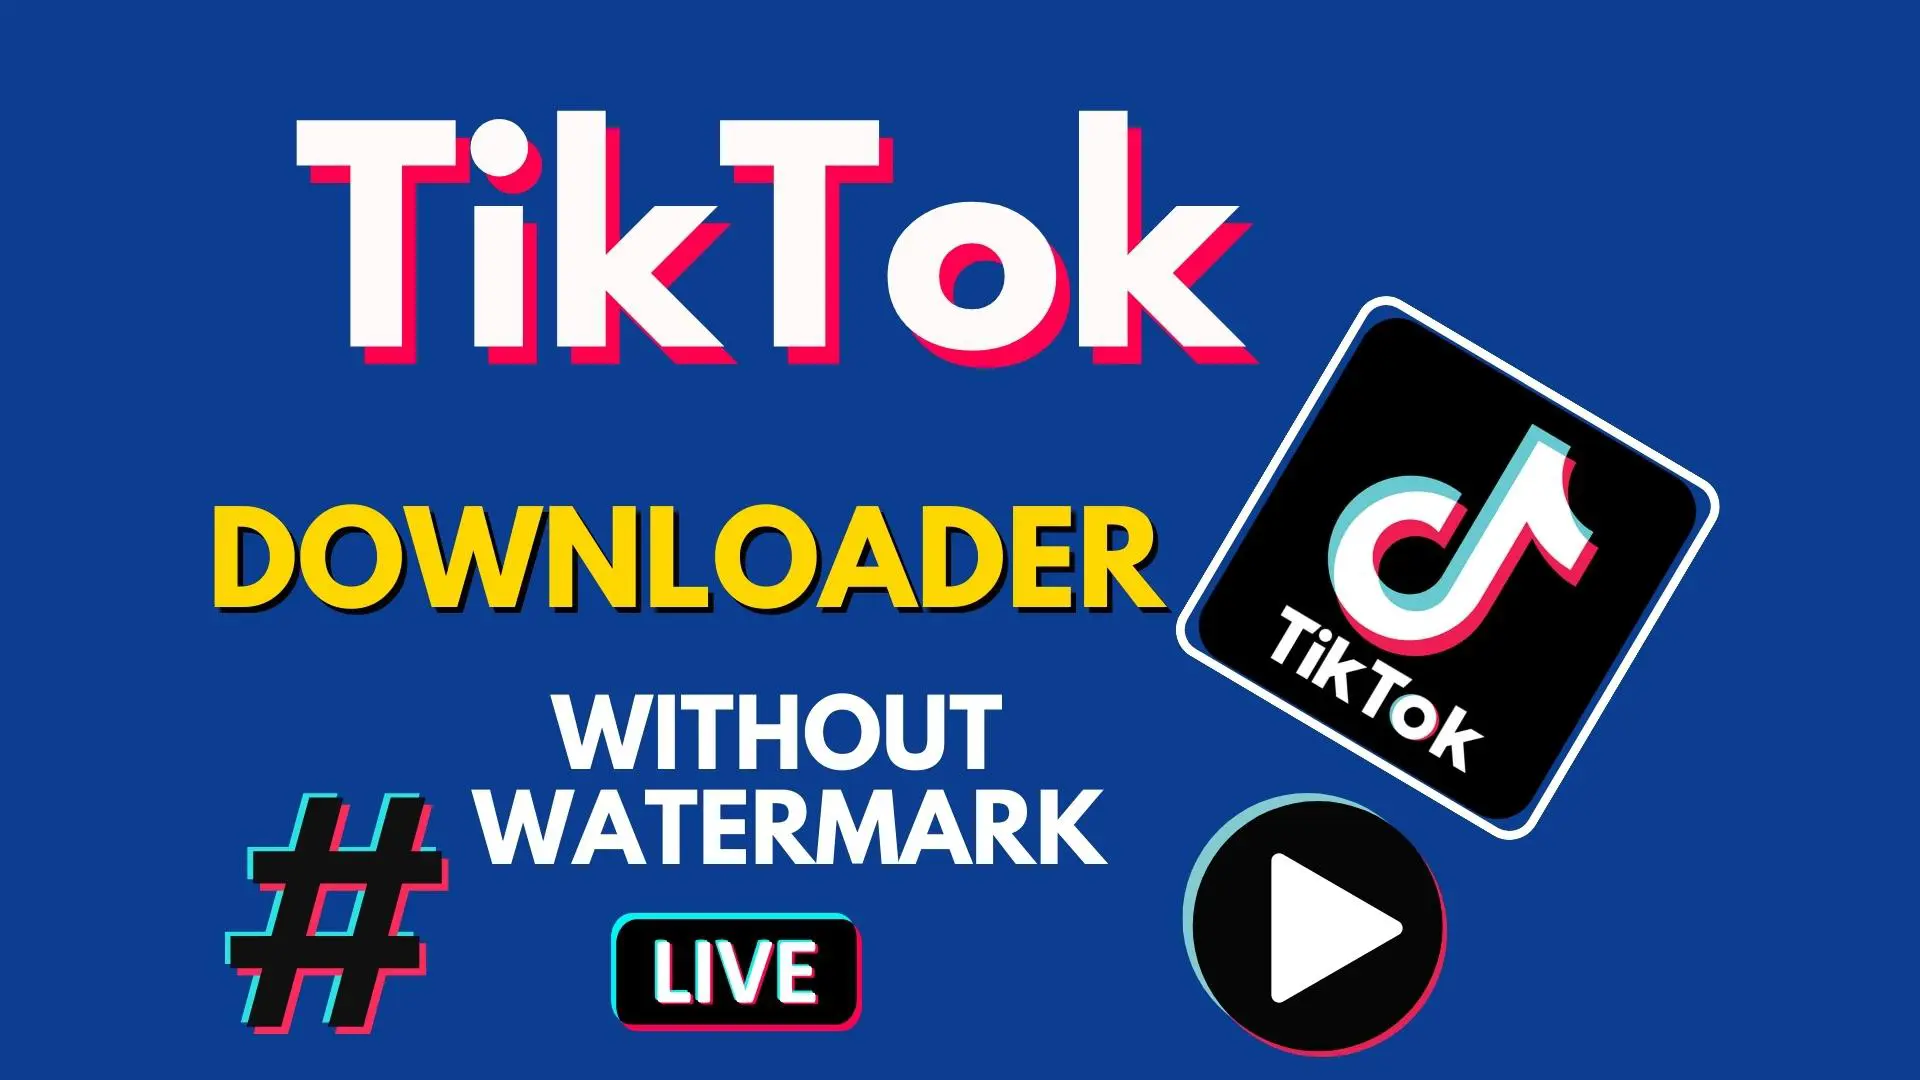 Download TikTok Video Without Watermark in 3 Step